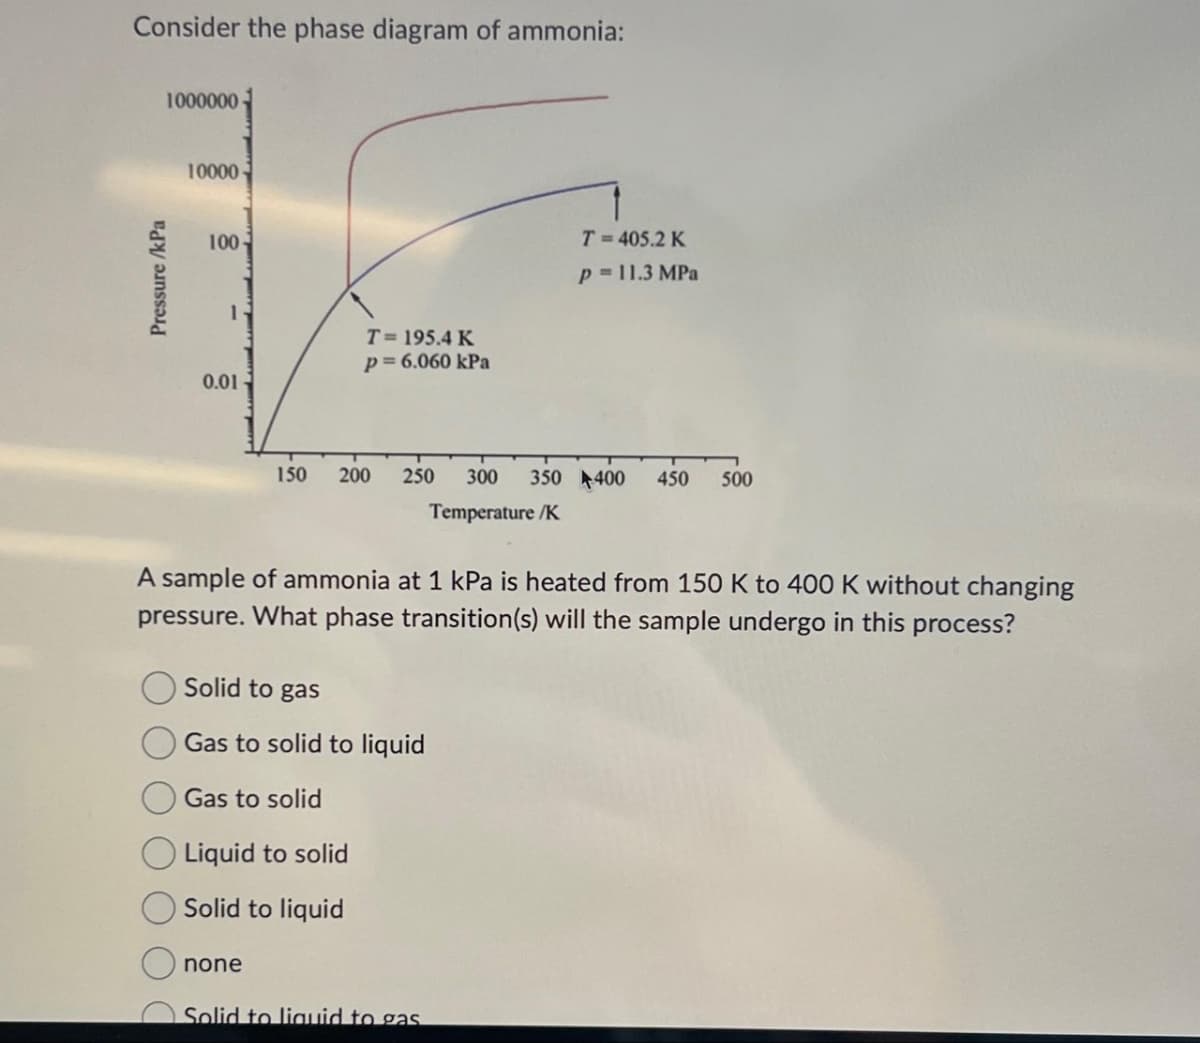 Consider the phase diagram of ammonia:
Pressure /kPa
1000000
10000
100-
1
0.01
T = 195.4 K
p = 6.060 kPa
150 200 250 300
none
Solid to gas
Gas to solid to liquid
Gas to solid
Liquid to solid
Solid to liquid
A sample of ammonia at 1 kPa is heated from 150 K to 400 K without changing
pressure. What phase transition(s) will the sample undergo in this process?
Solid to liquid to gas
T=405.2 K
p = 11.3 MPa
350 400 450 500
Temperature/K